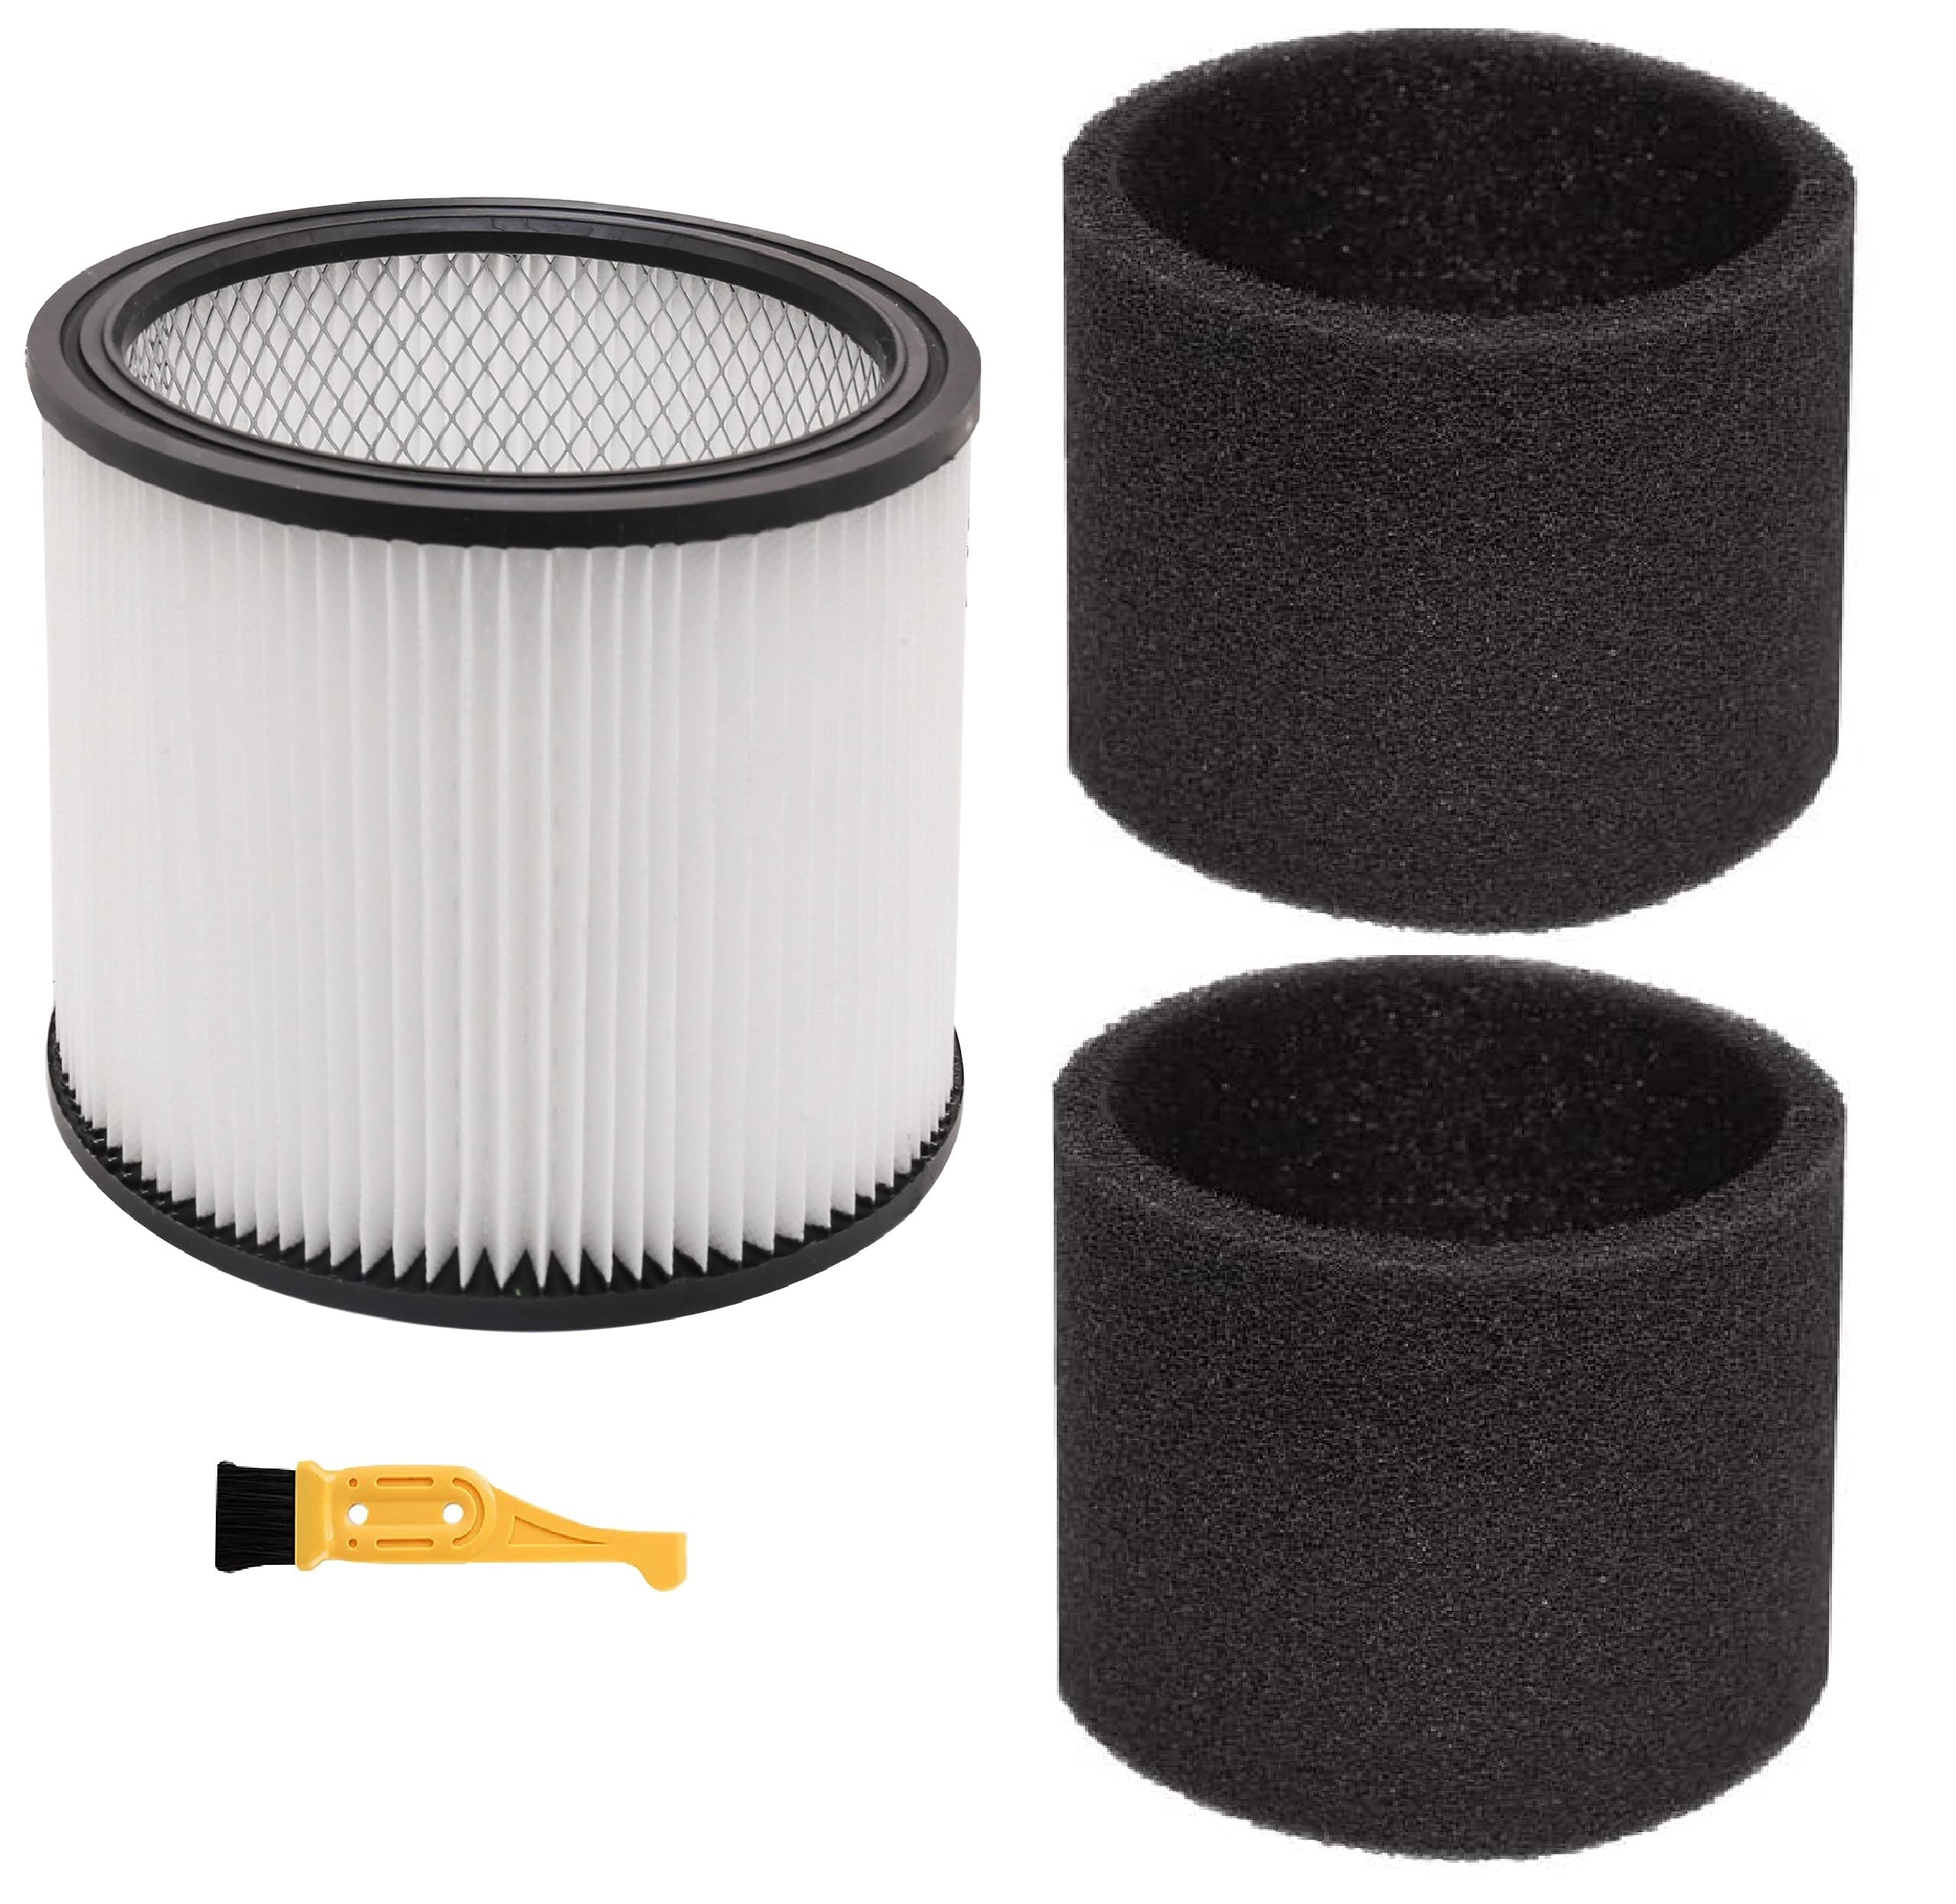 Replacement 90304 90350 90333 9030462 Cartridge Filter Foam Sleeve Compatible with Shop-Vac 5 Gallon Up Wet/Dry Vacuum Cleaners Compare to Part # 90304,90585